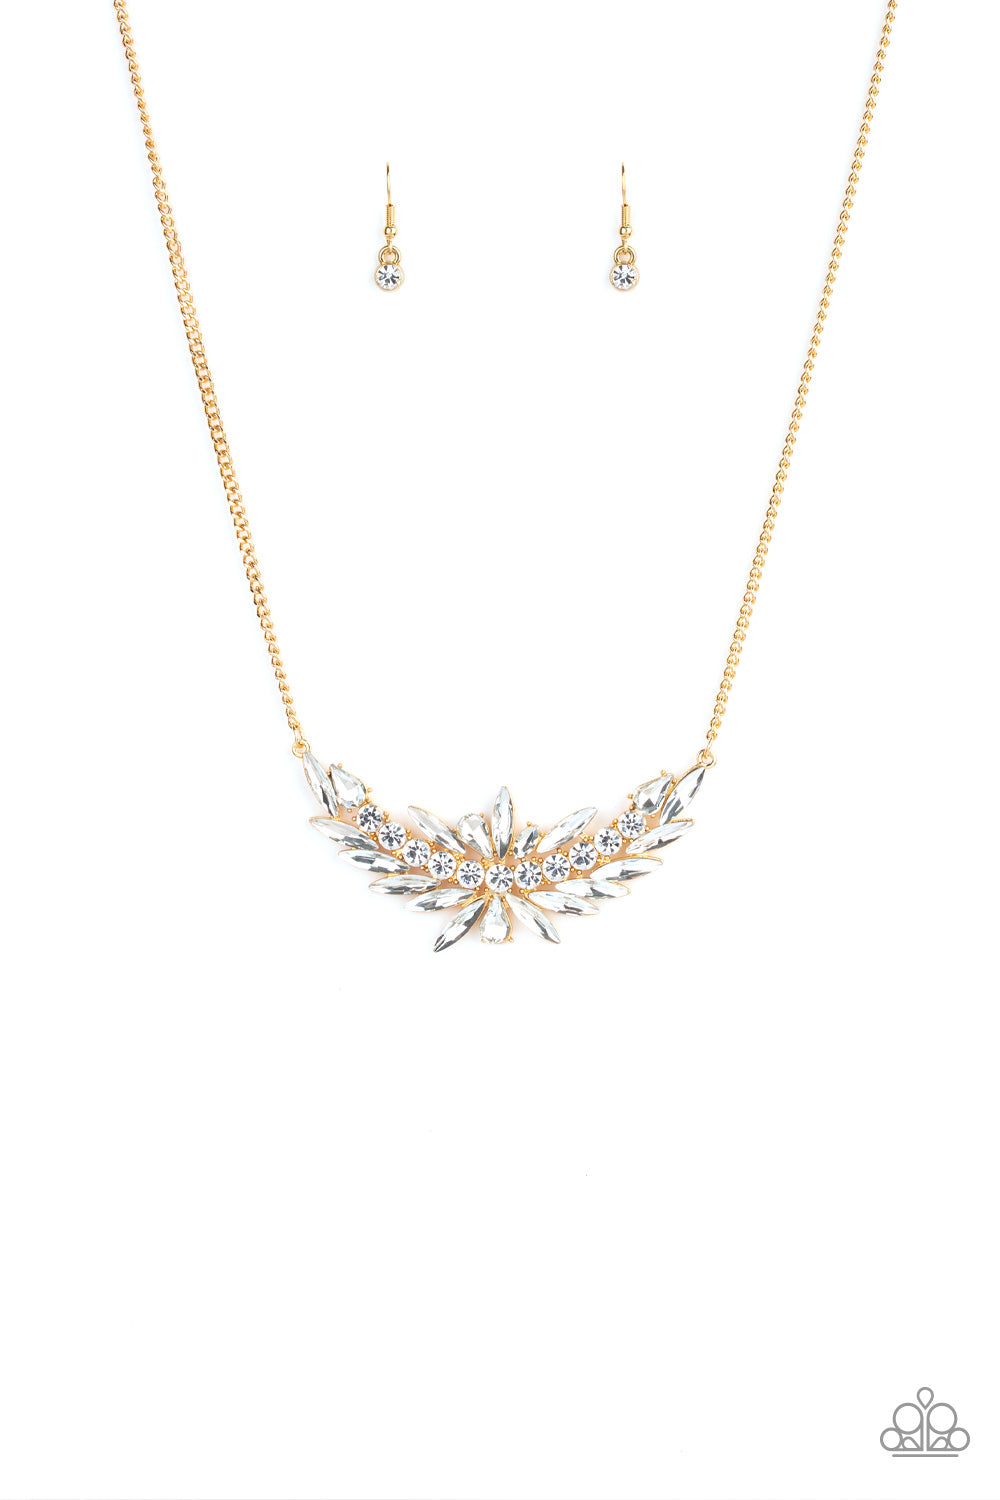 HEIRS AND GRACES - GOLD NECKLACE